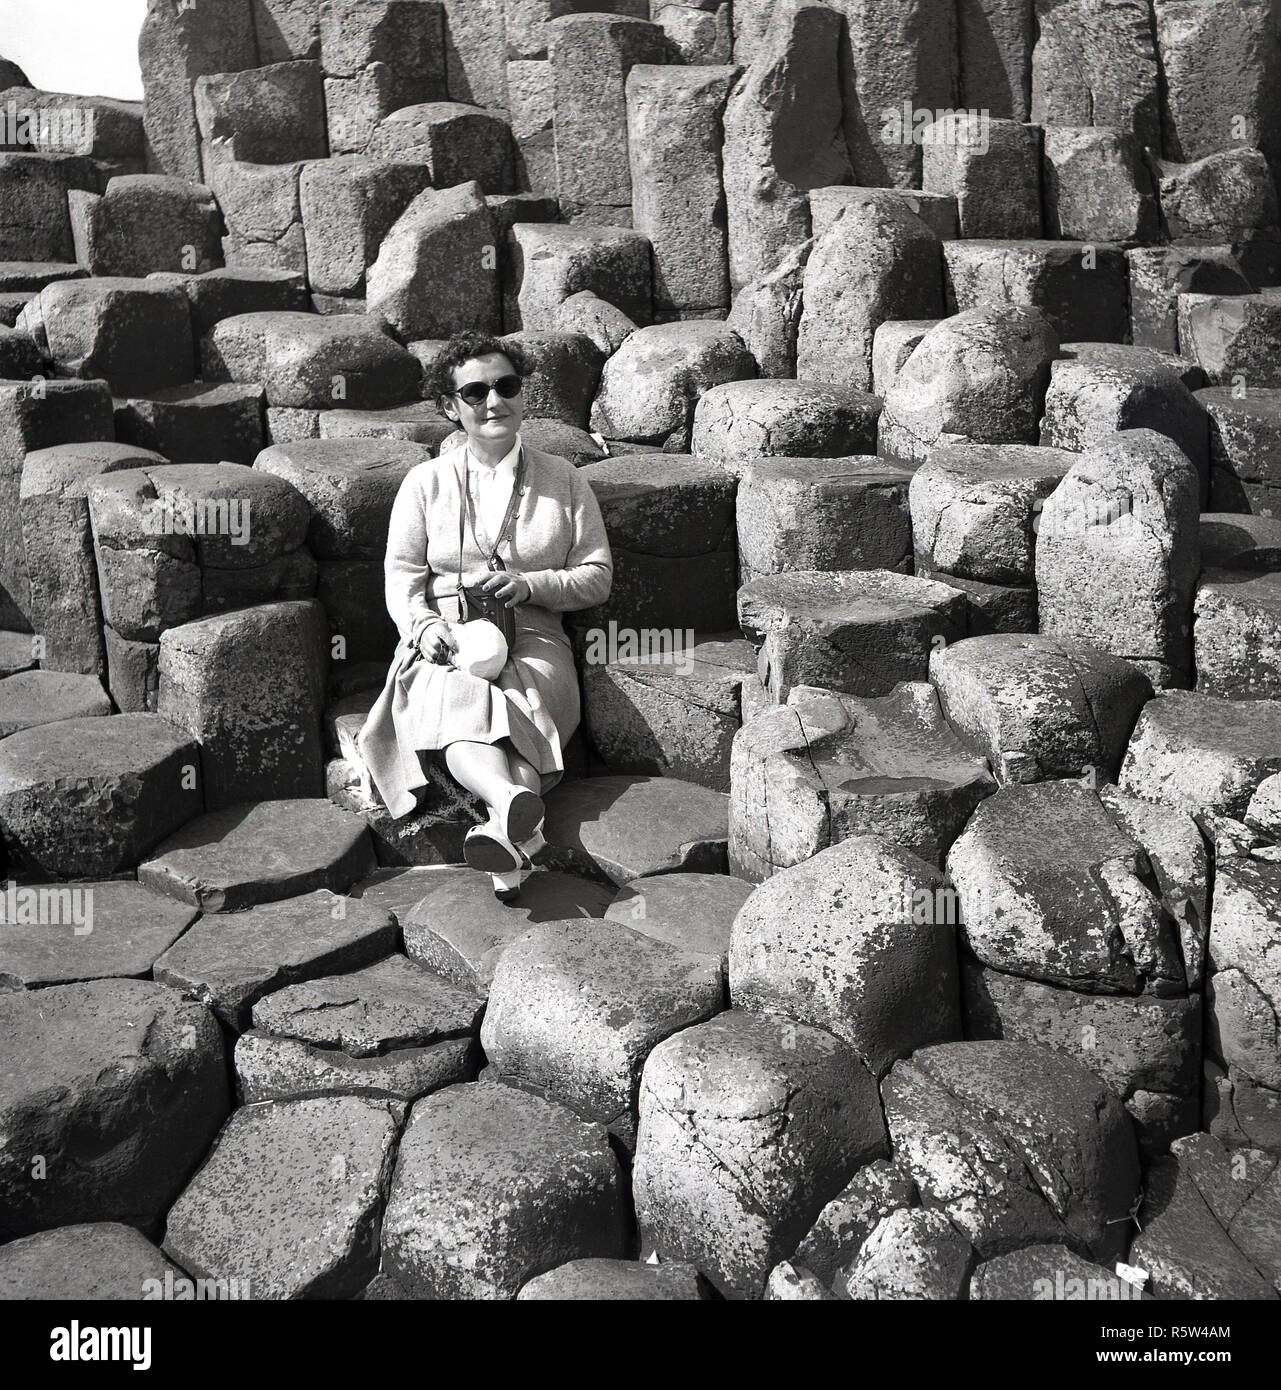 1950s, historical, a lady sitting on the ancient volcanic basalt columns at the Giant's Causeway in Co. Antrim, Northern Ireland. At the North Atlantic coast, the causeway is a geological wonder, an area of 40,000 interlocking basalt stone columns, the result of an ancient volcanic fissure eruption. Stock Photo